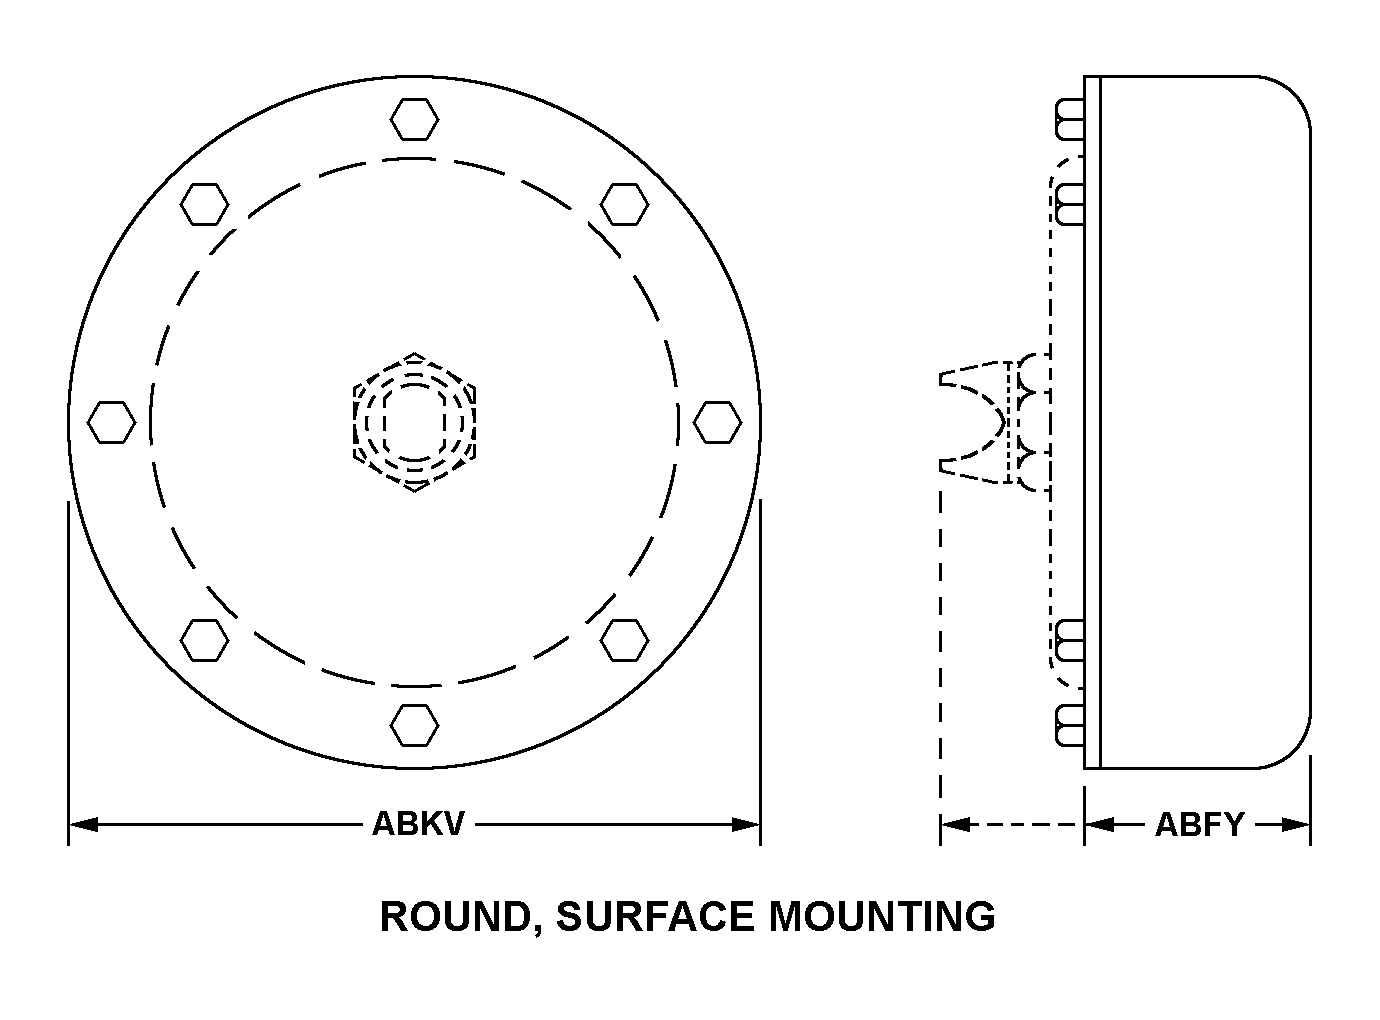 ROUND, SURFACE MOUNTING style nsn 6110-01-169-5165